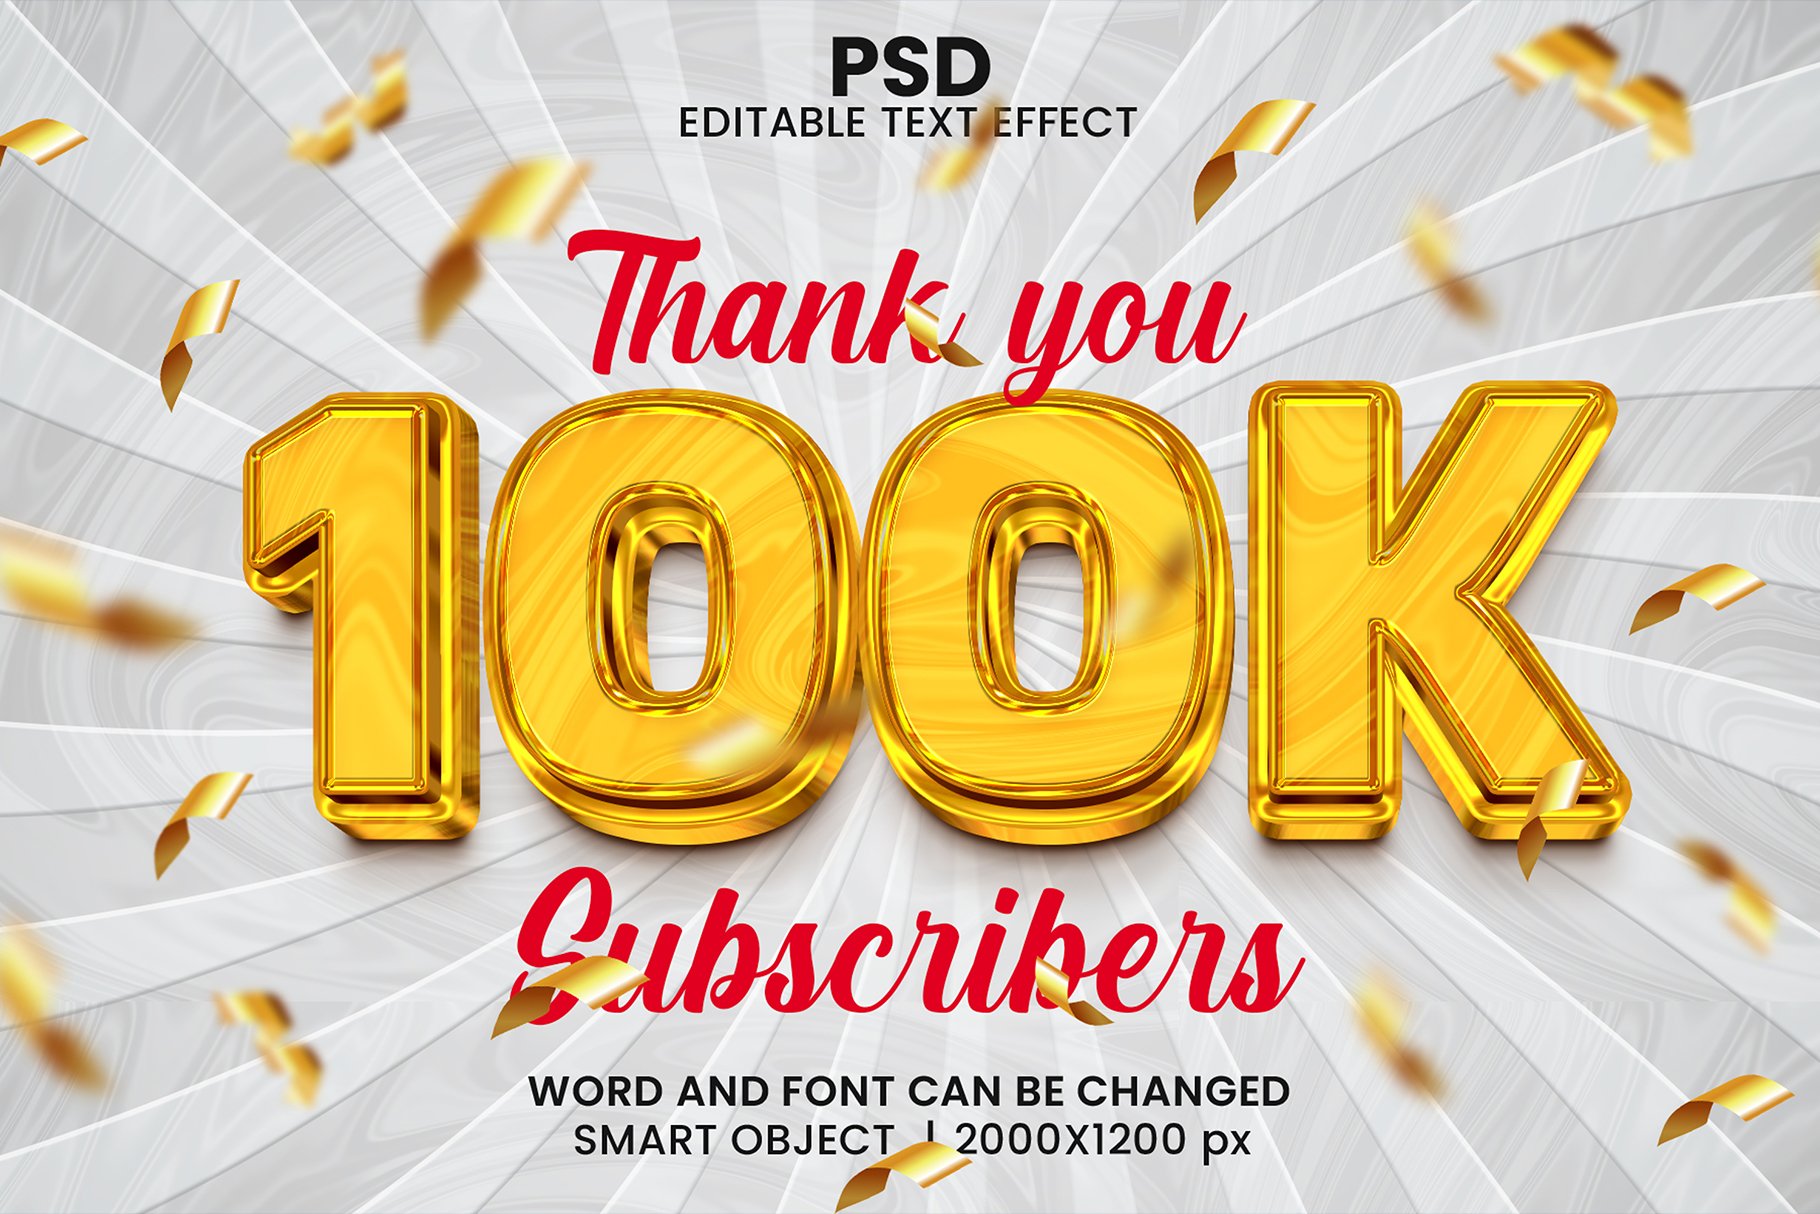 100k luxury Psd Text Effectcover image.